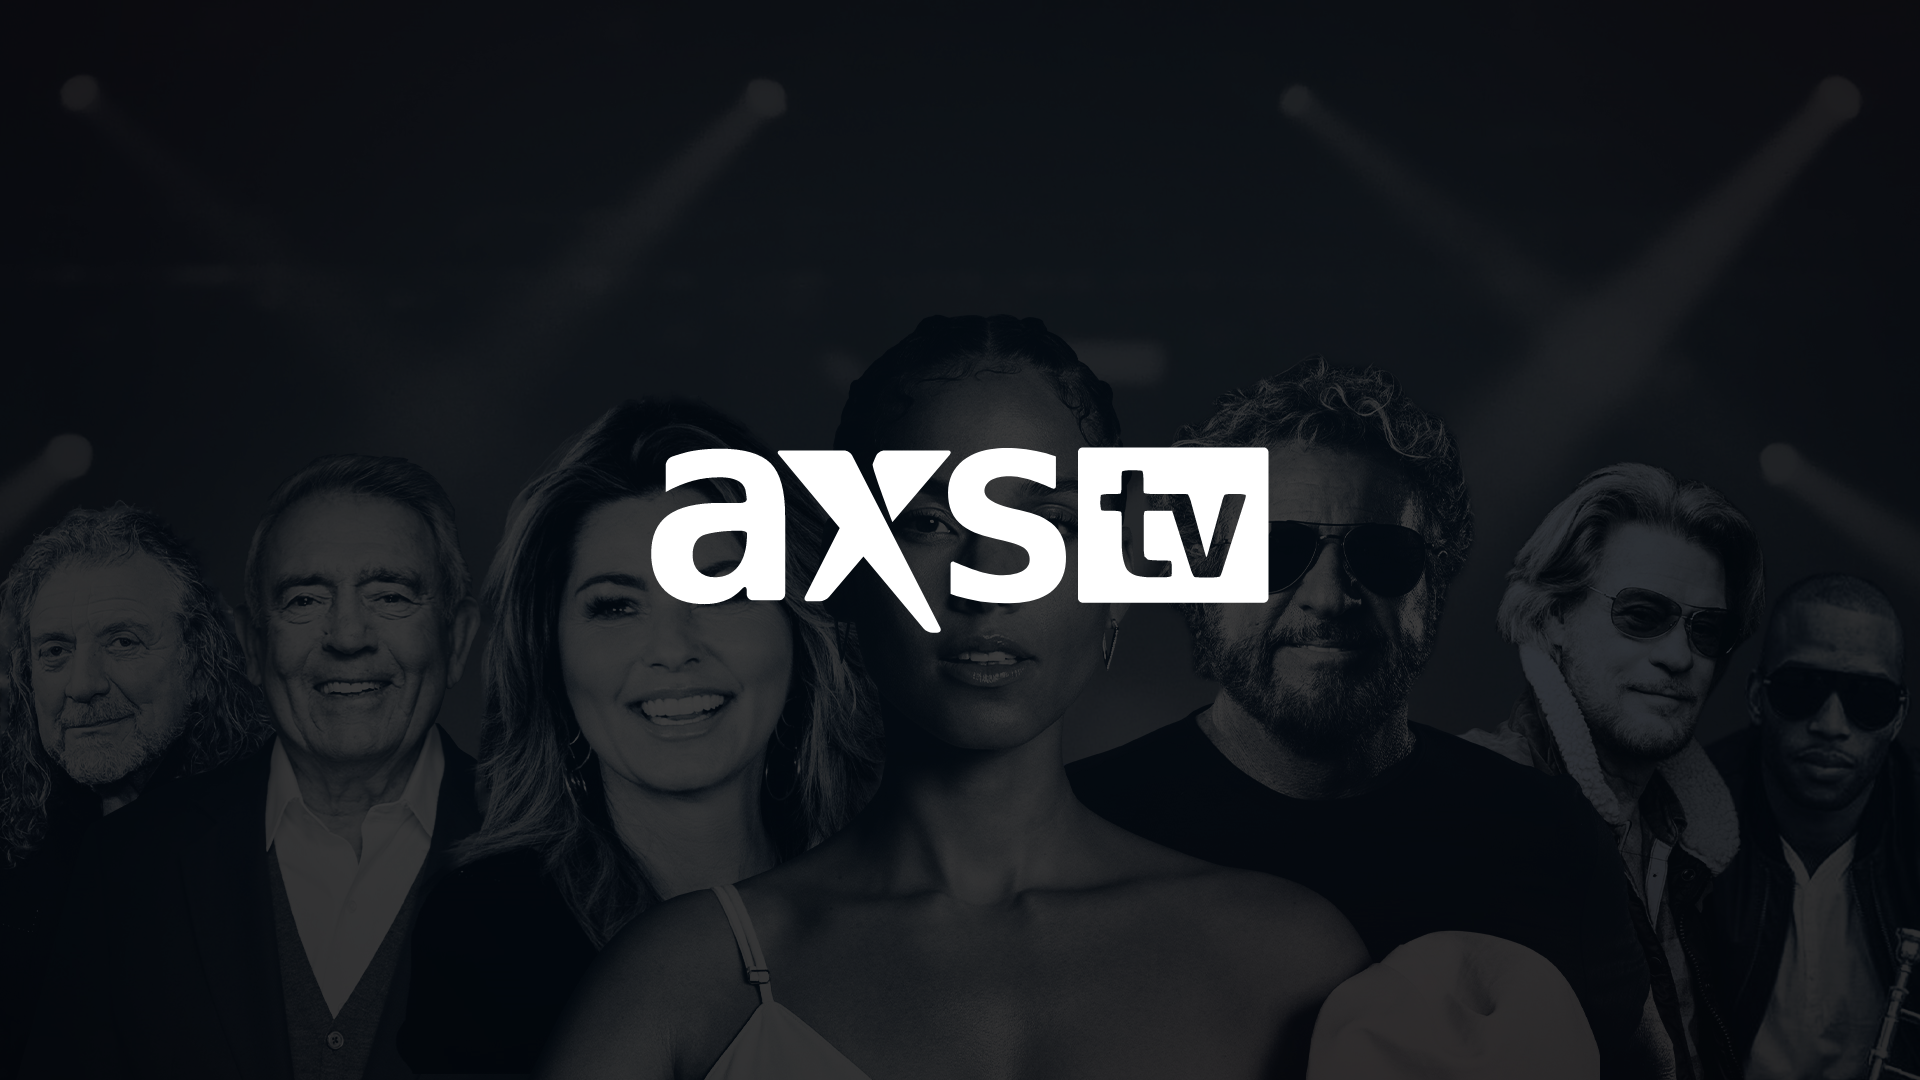 How To Watch Axs TV Without Cable